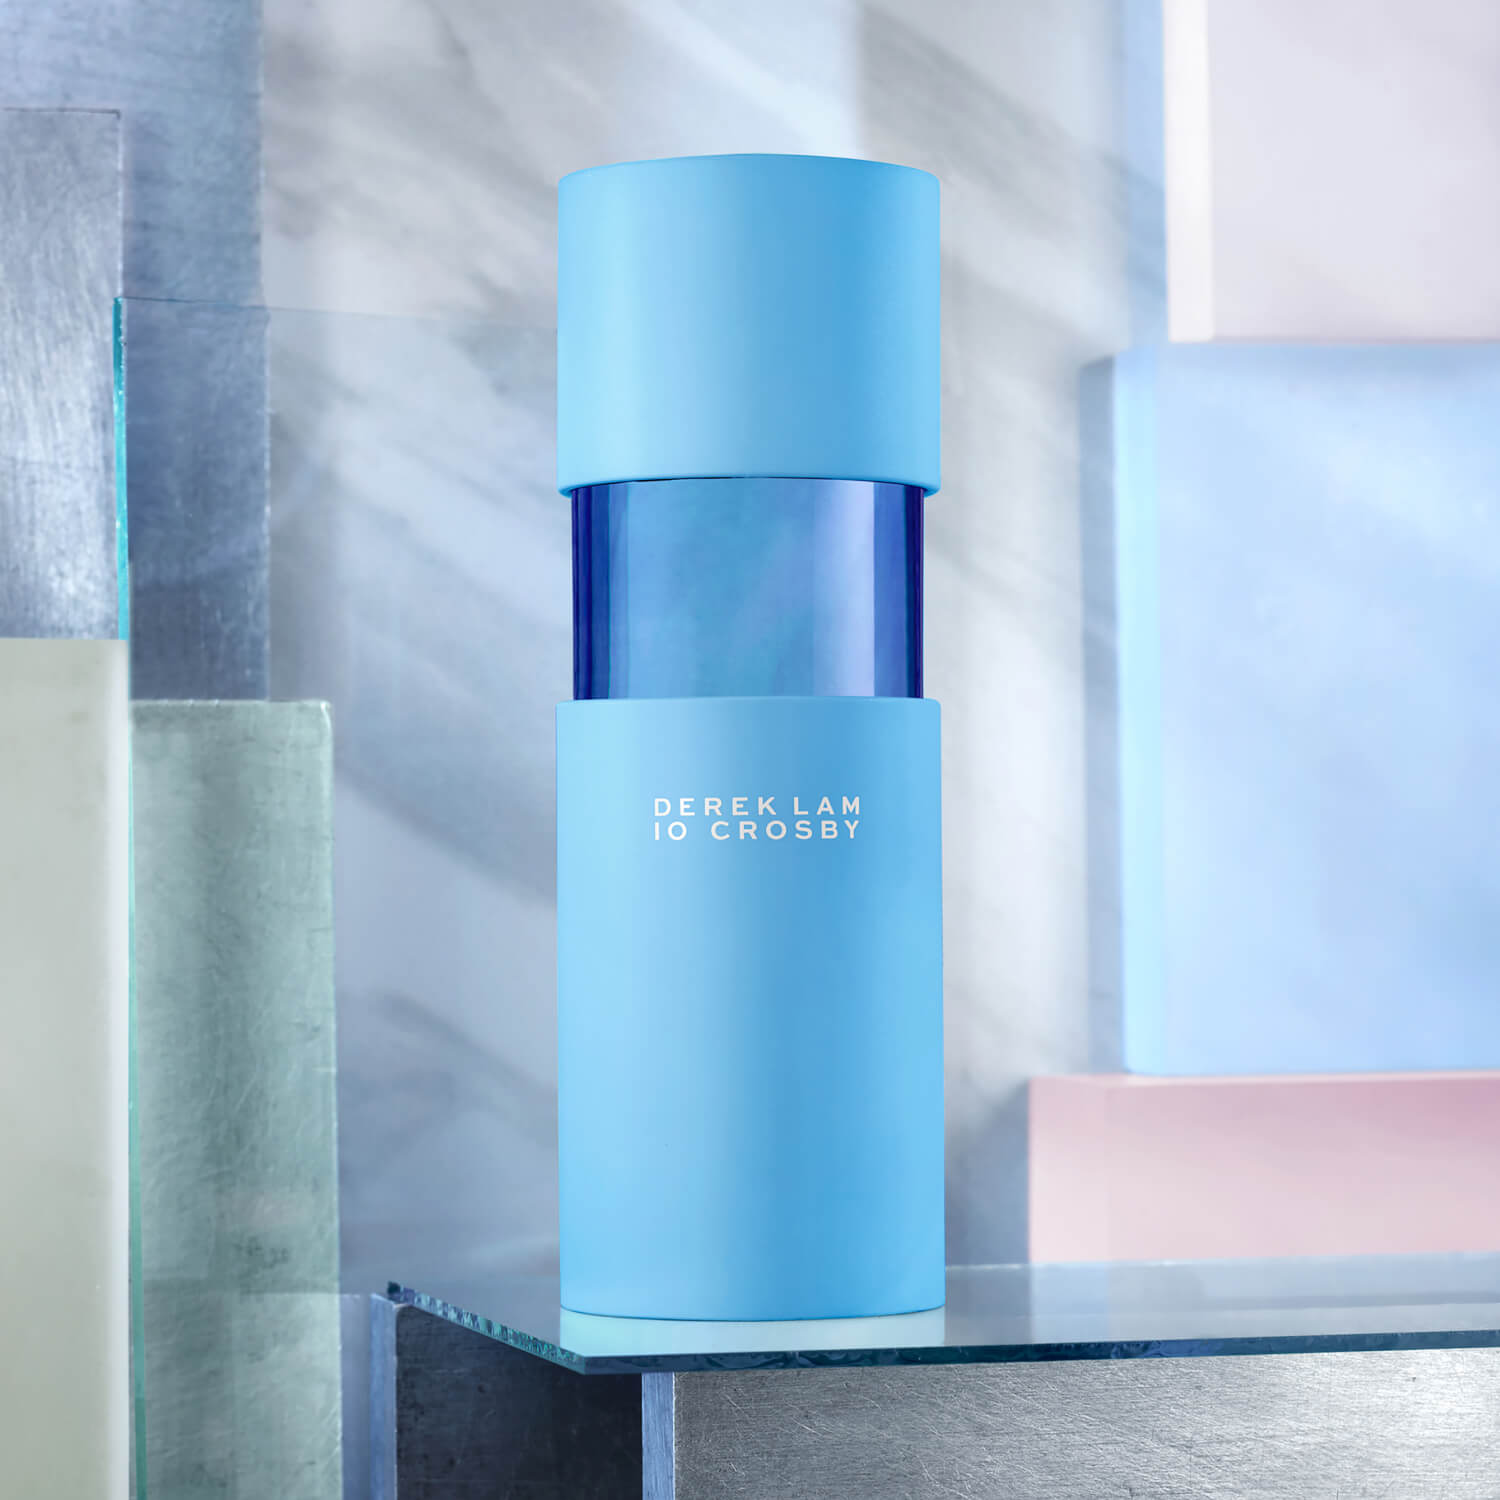 Buy DEREK LAM 10 CROSBY All of Me at Scentbird for $16.95